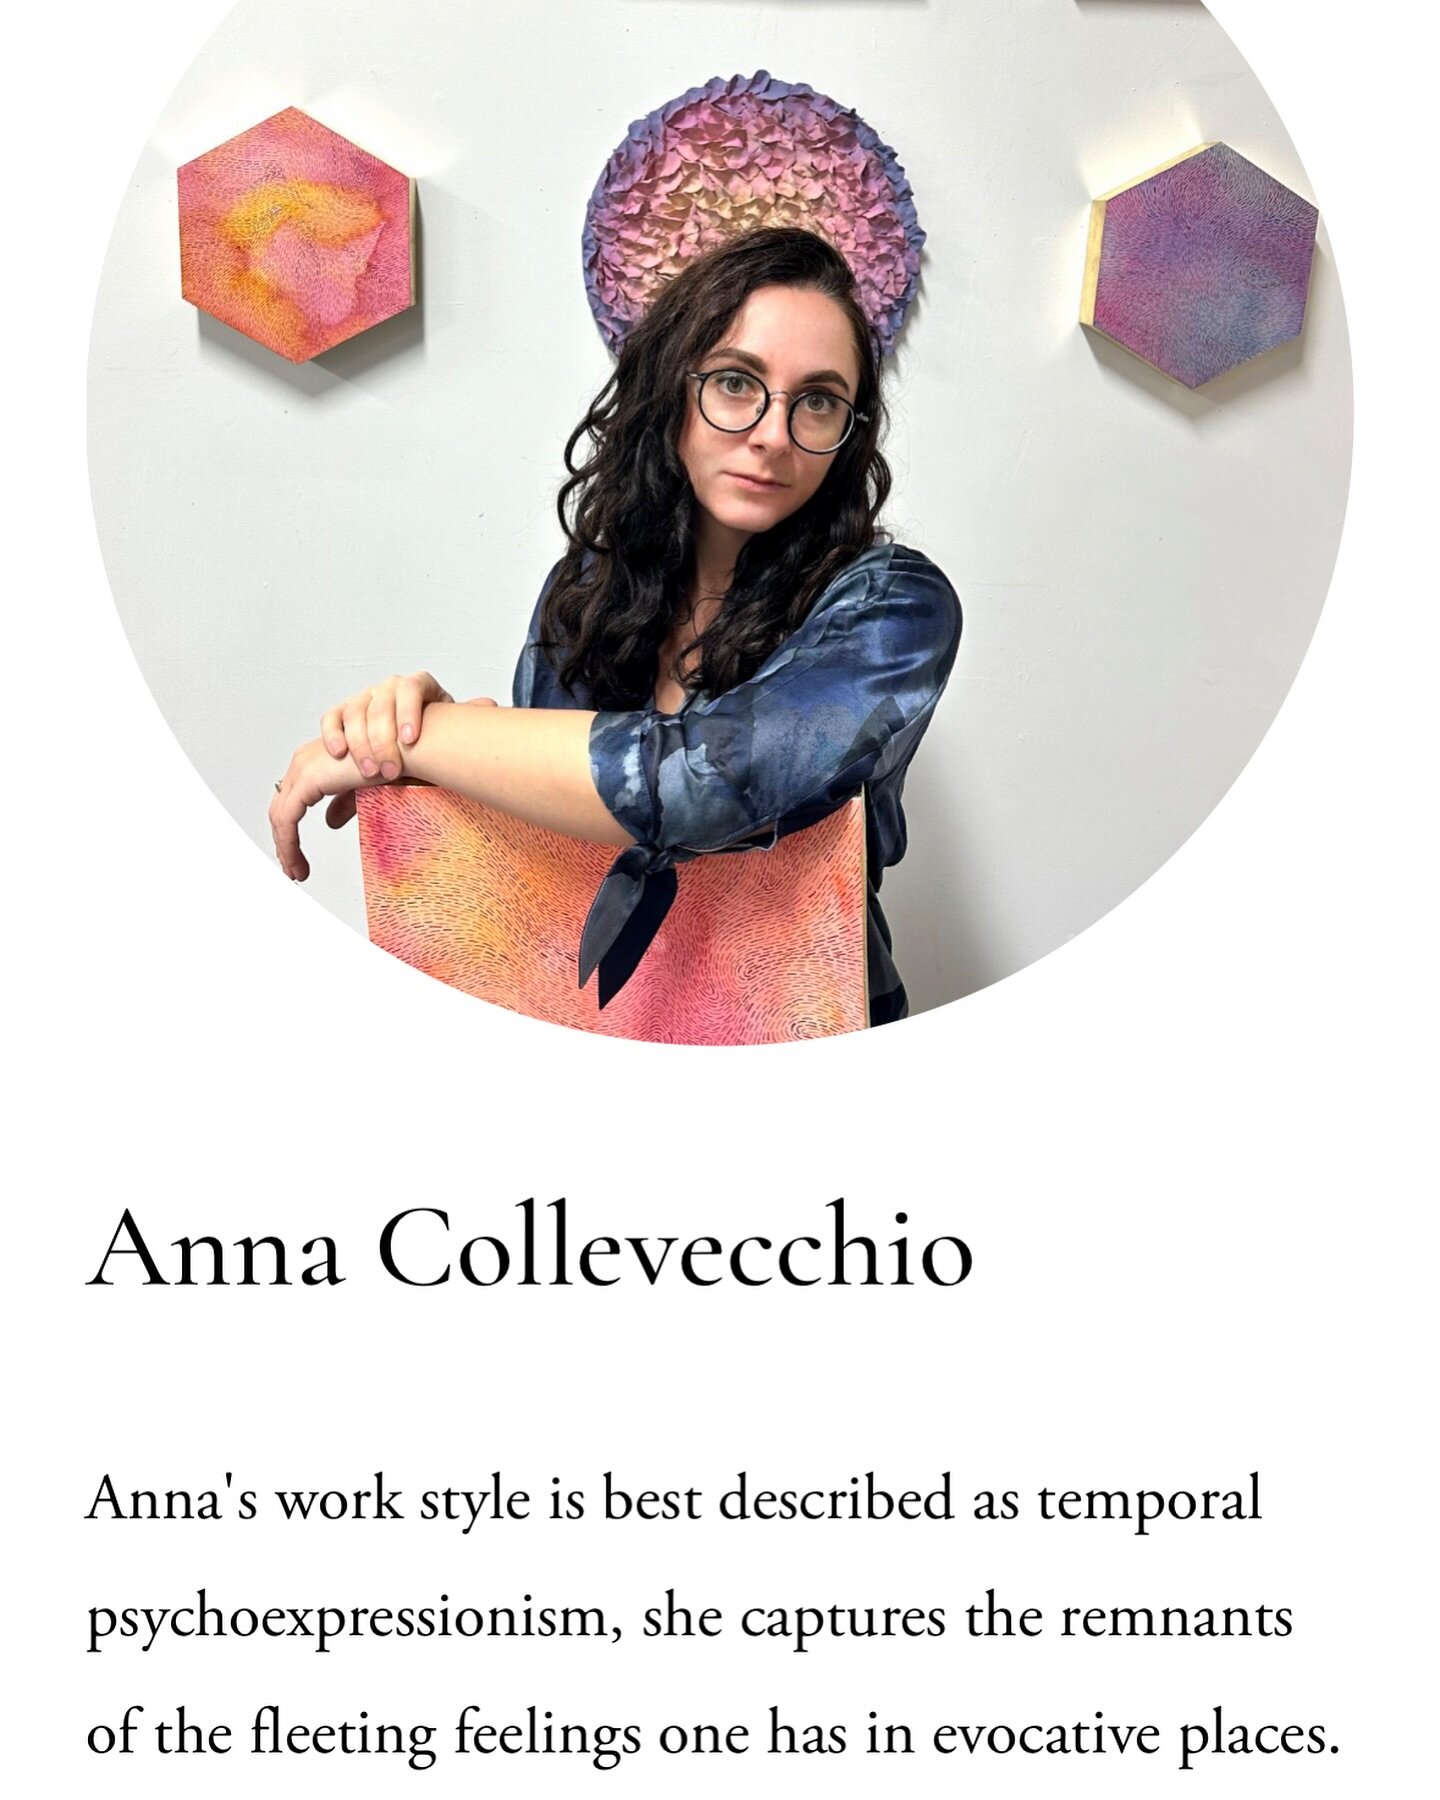 Let&rsquo;s make it official - recording my first art publication! Haven&rsquo;t published anything since my old academic years, so feeling pretty pumped about it. Thank you @artistcloseupblog for the feature.

#abstractart #art #artcollector #artcur